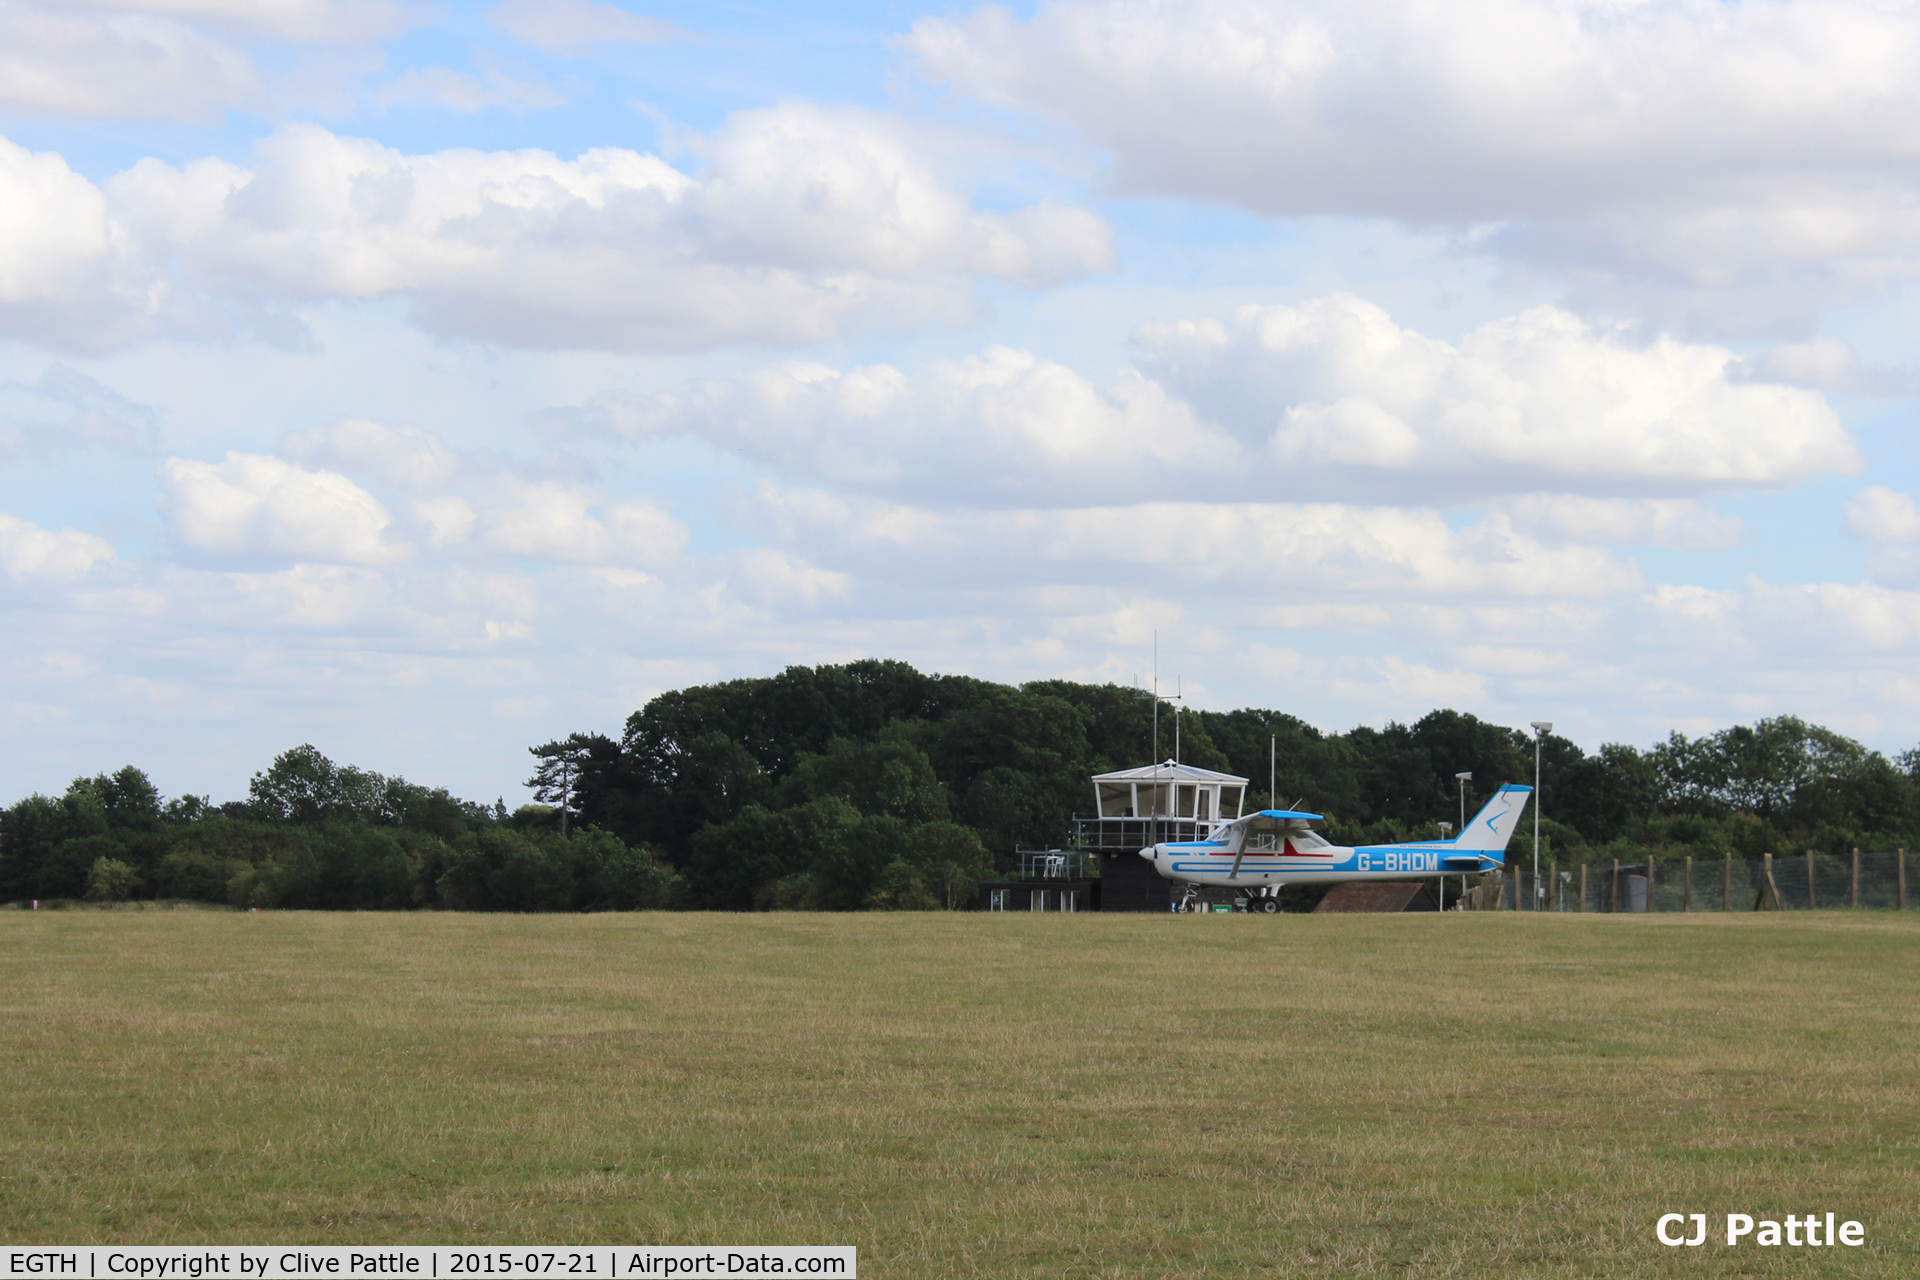 EGTH Airport - A view across the airfield towards the tower at The Shuttleworth Trust, Old Warden Airfield. EGTH